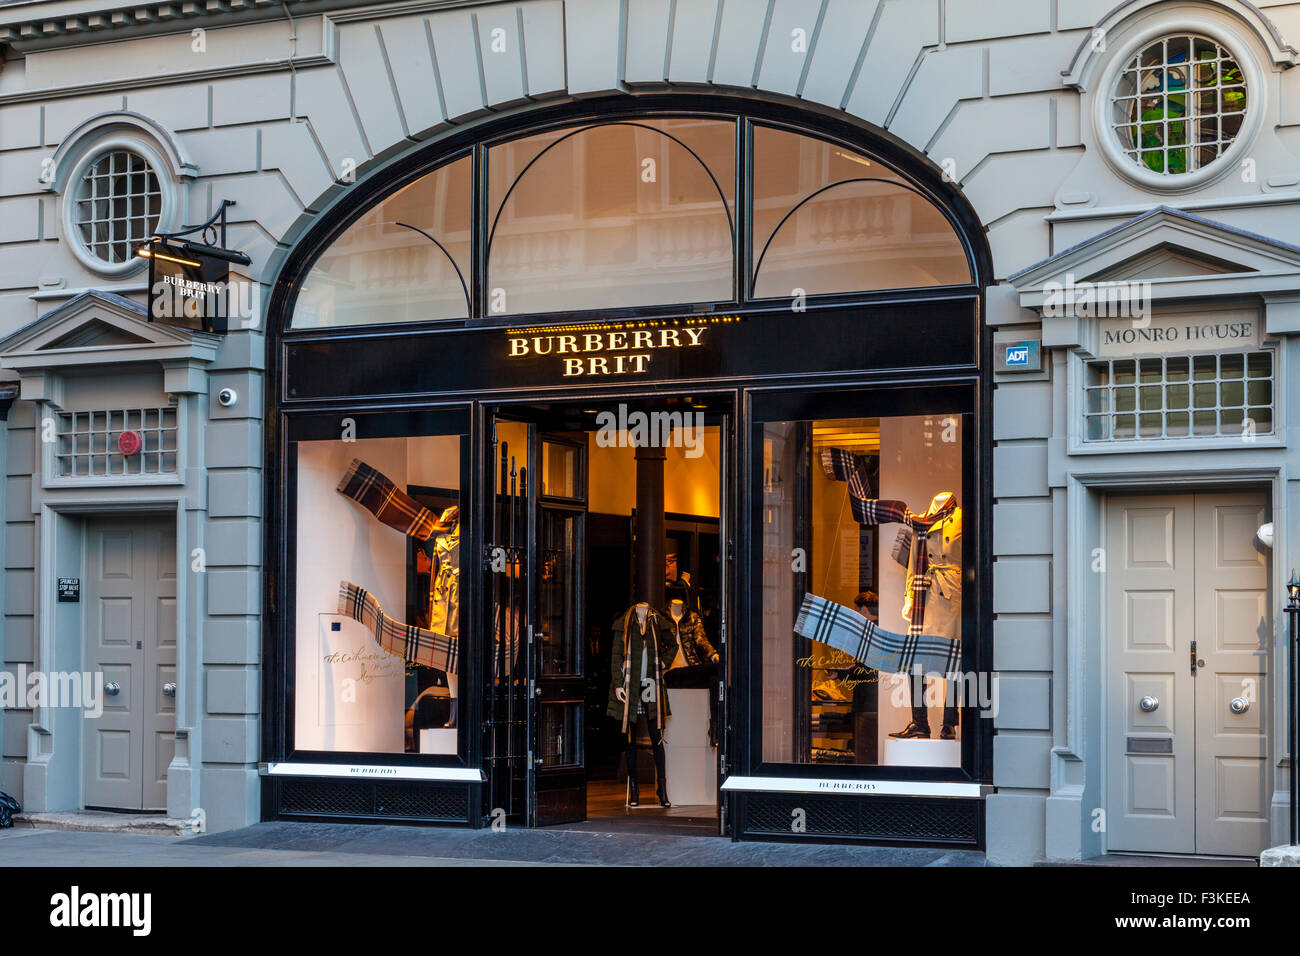 The Burberry Brit Store, Covent Garden, London, UK Stock Photo - Alamy